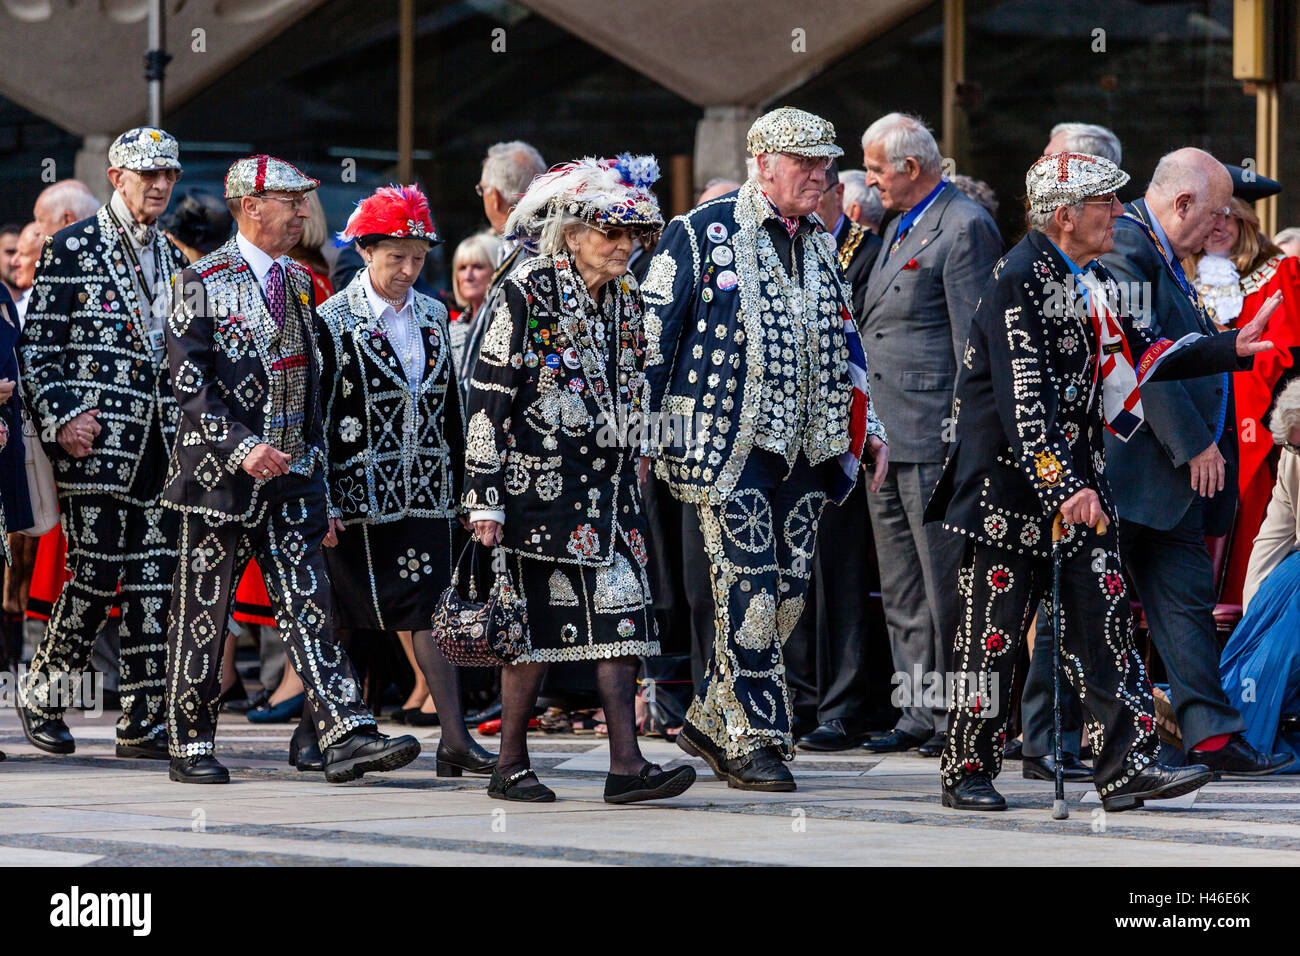 Pearly Kings and Queens Parade Around The Guildhall Yard During The Annual Pearly Kings and Queens' Harvest Festival, London, UK Stock Photo